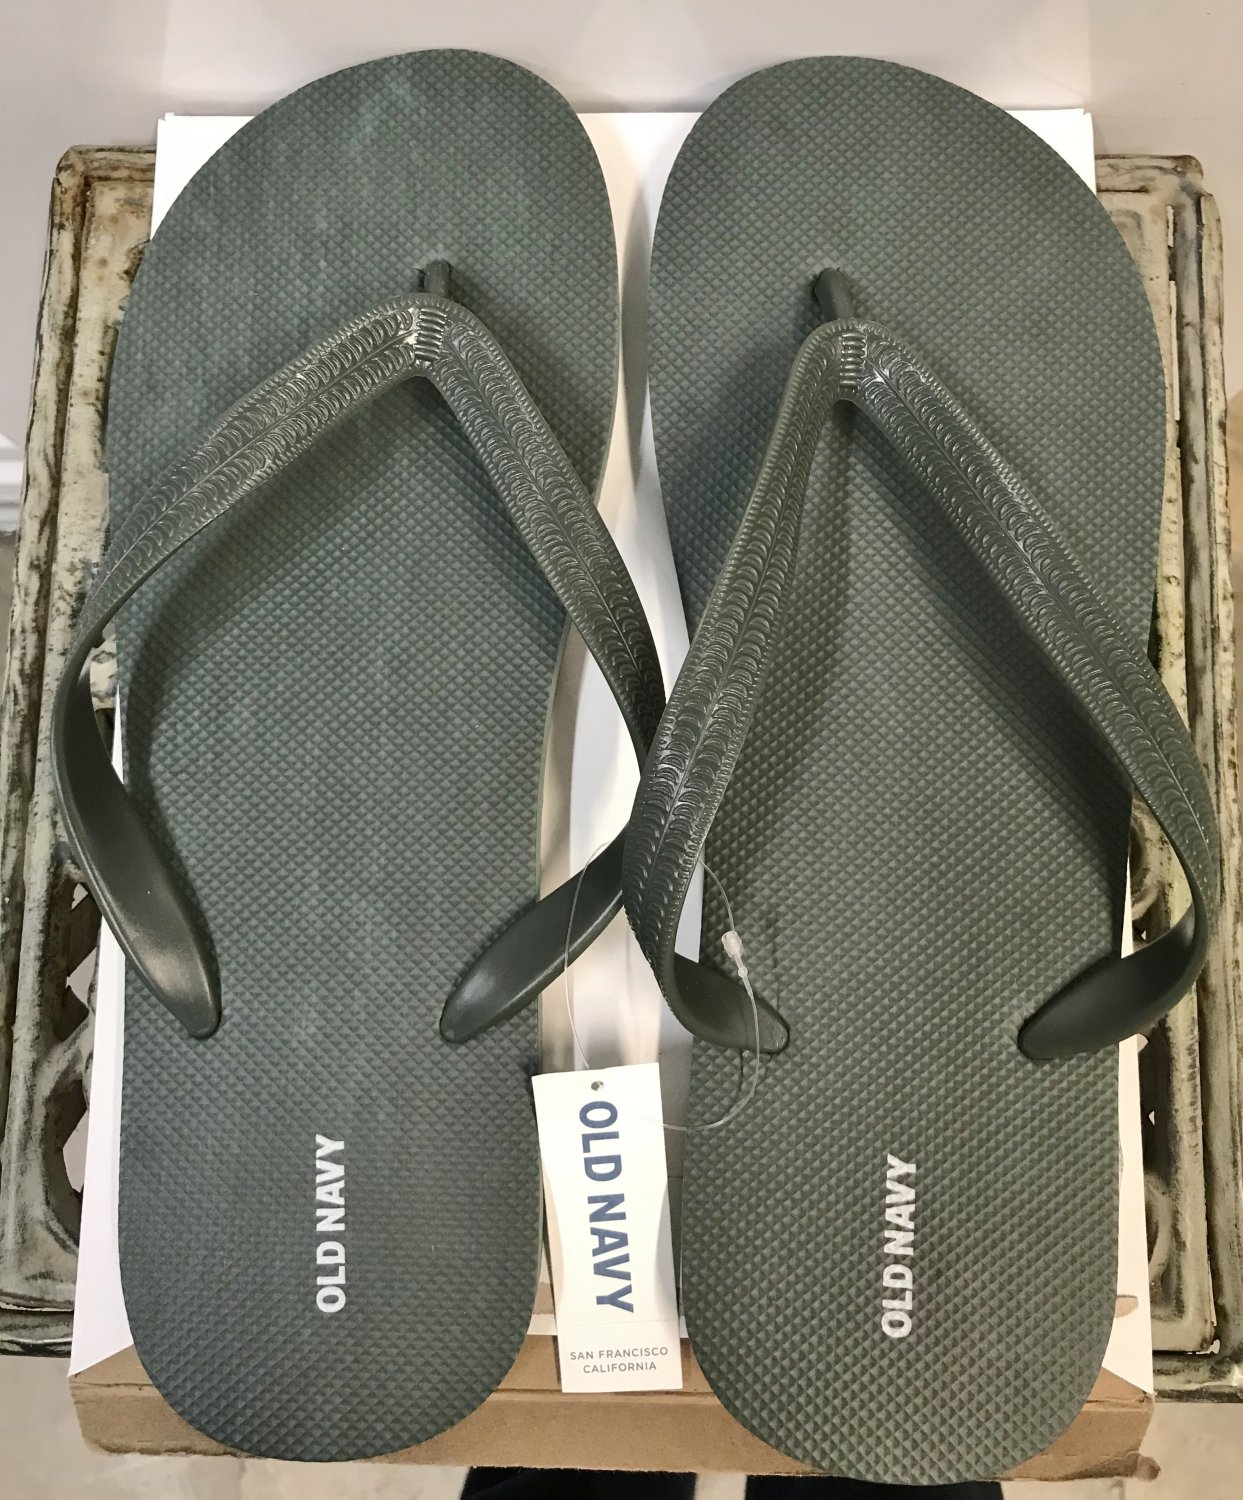 New Mens Flip Flops Old Navy Sandals Size 12 13 Heathered Green Shoes